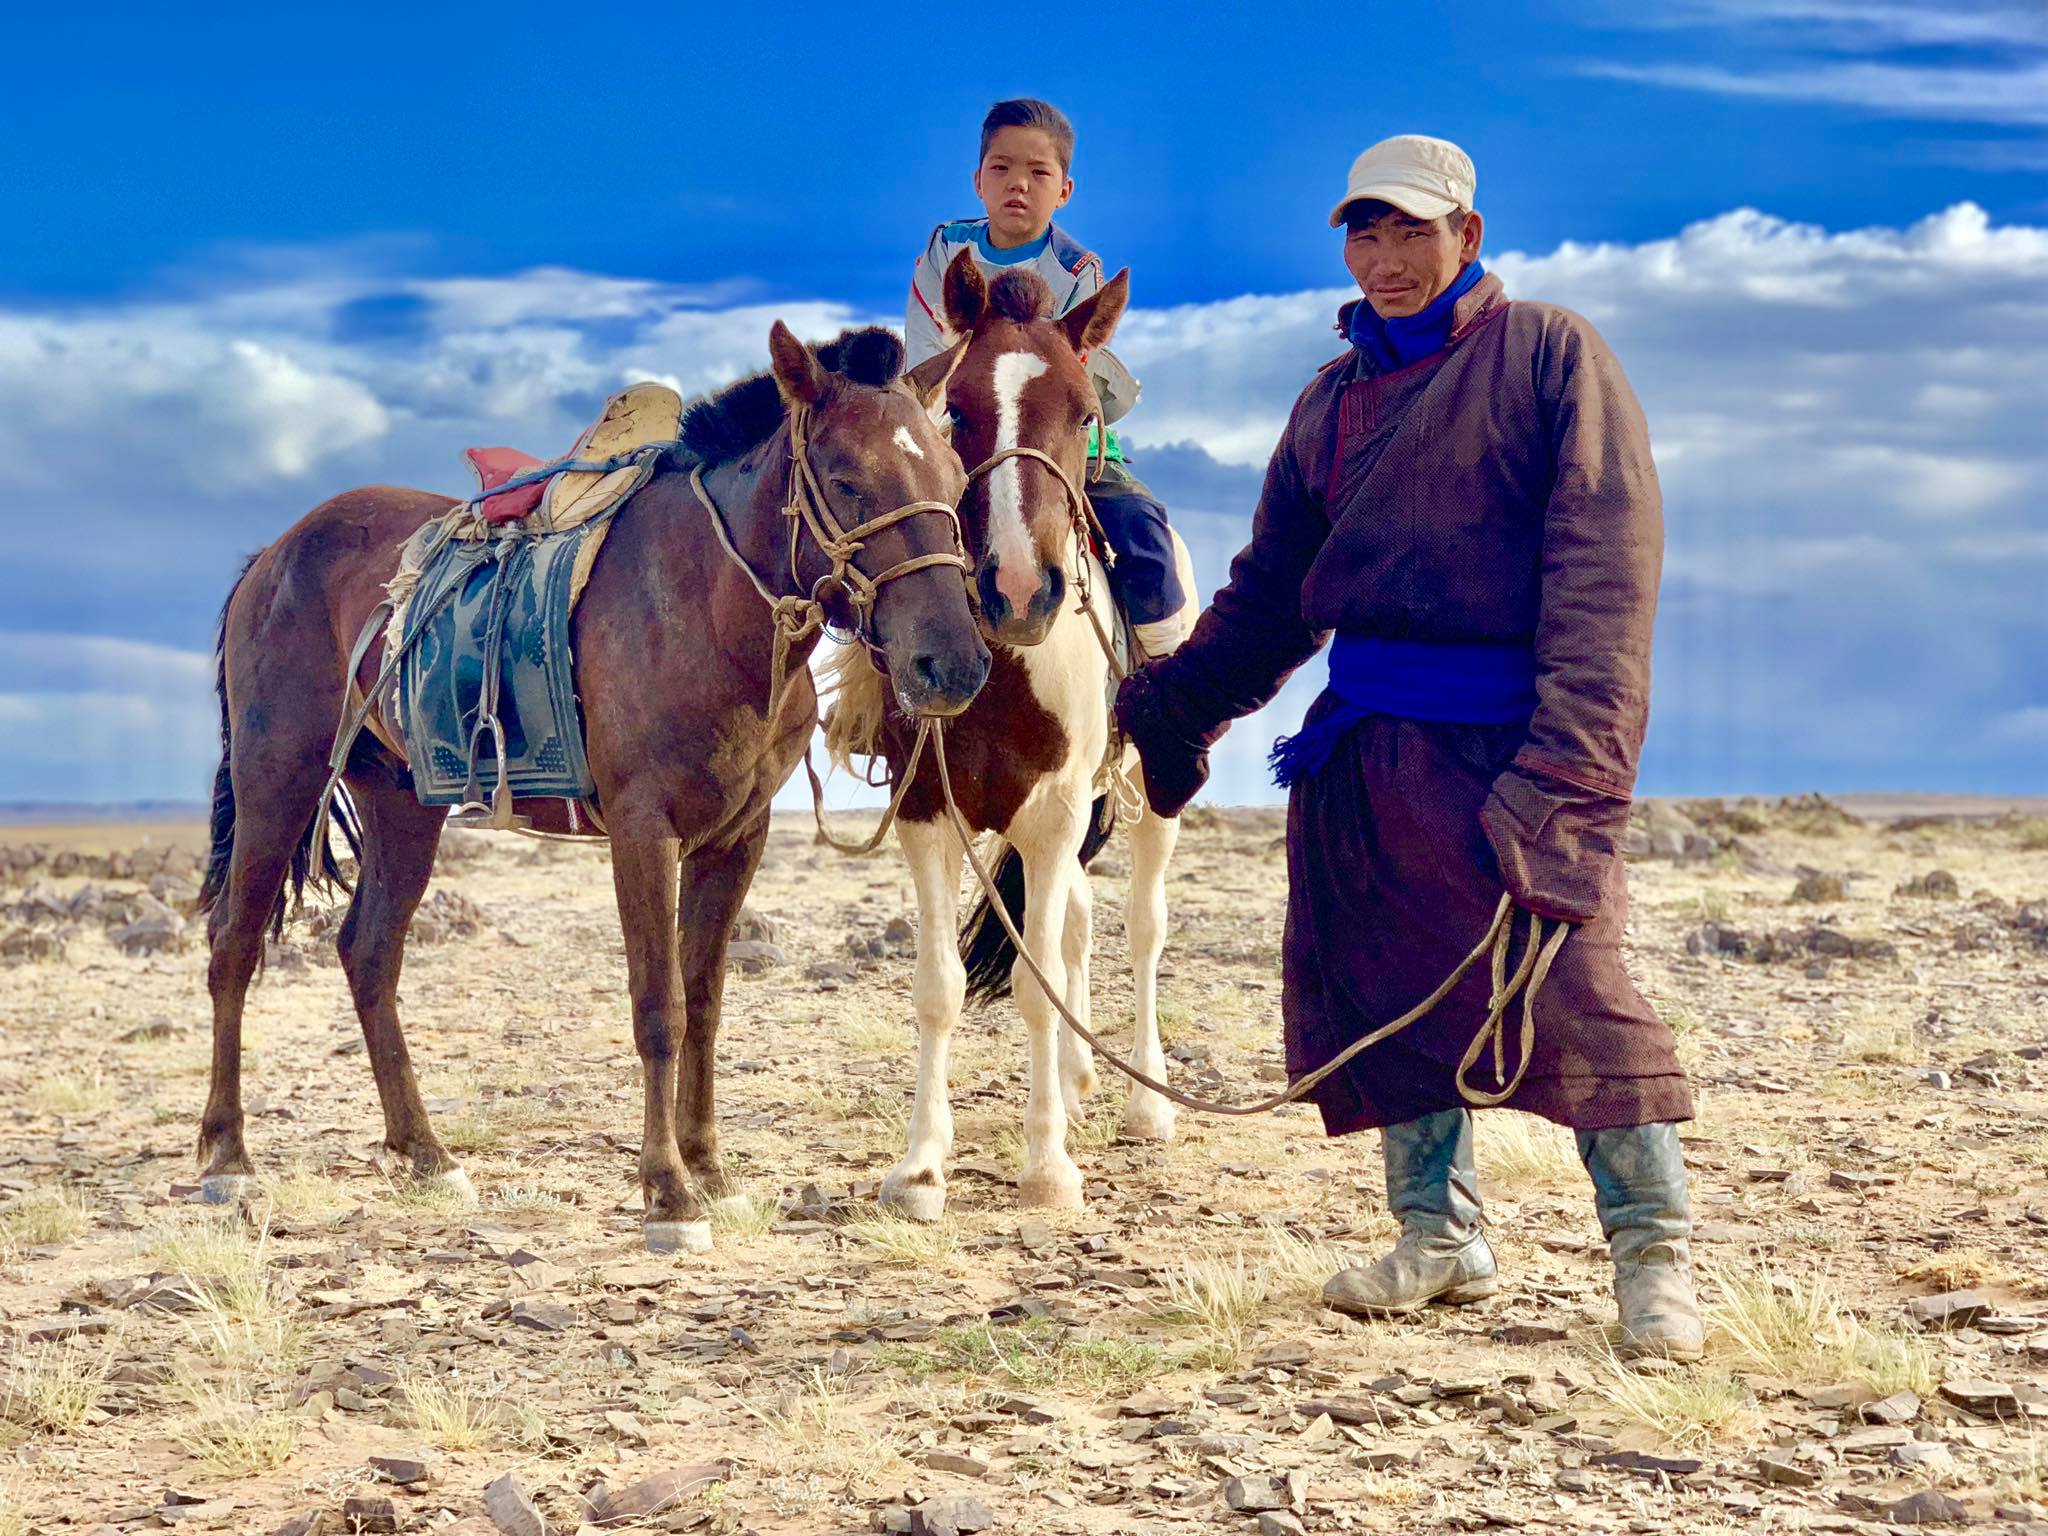 Kach Solo Travels in 2019 One of the hikes during my trip in Gobi desert29.jpg